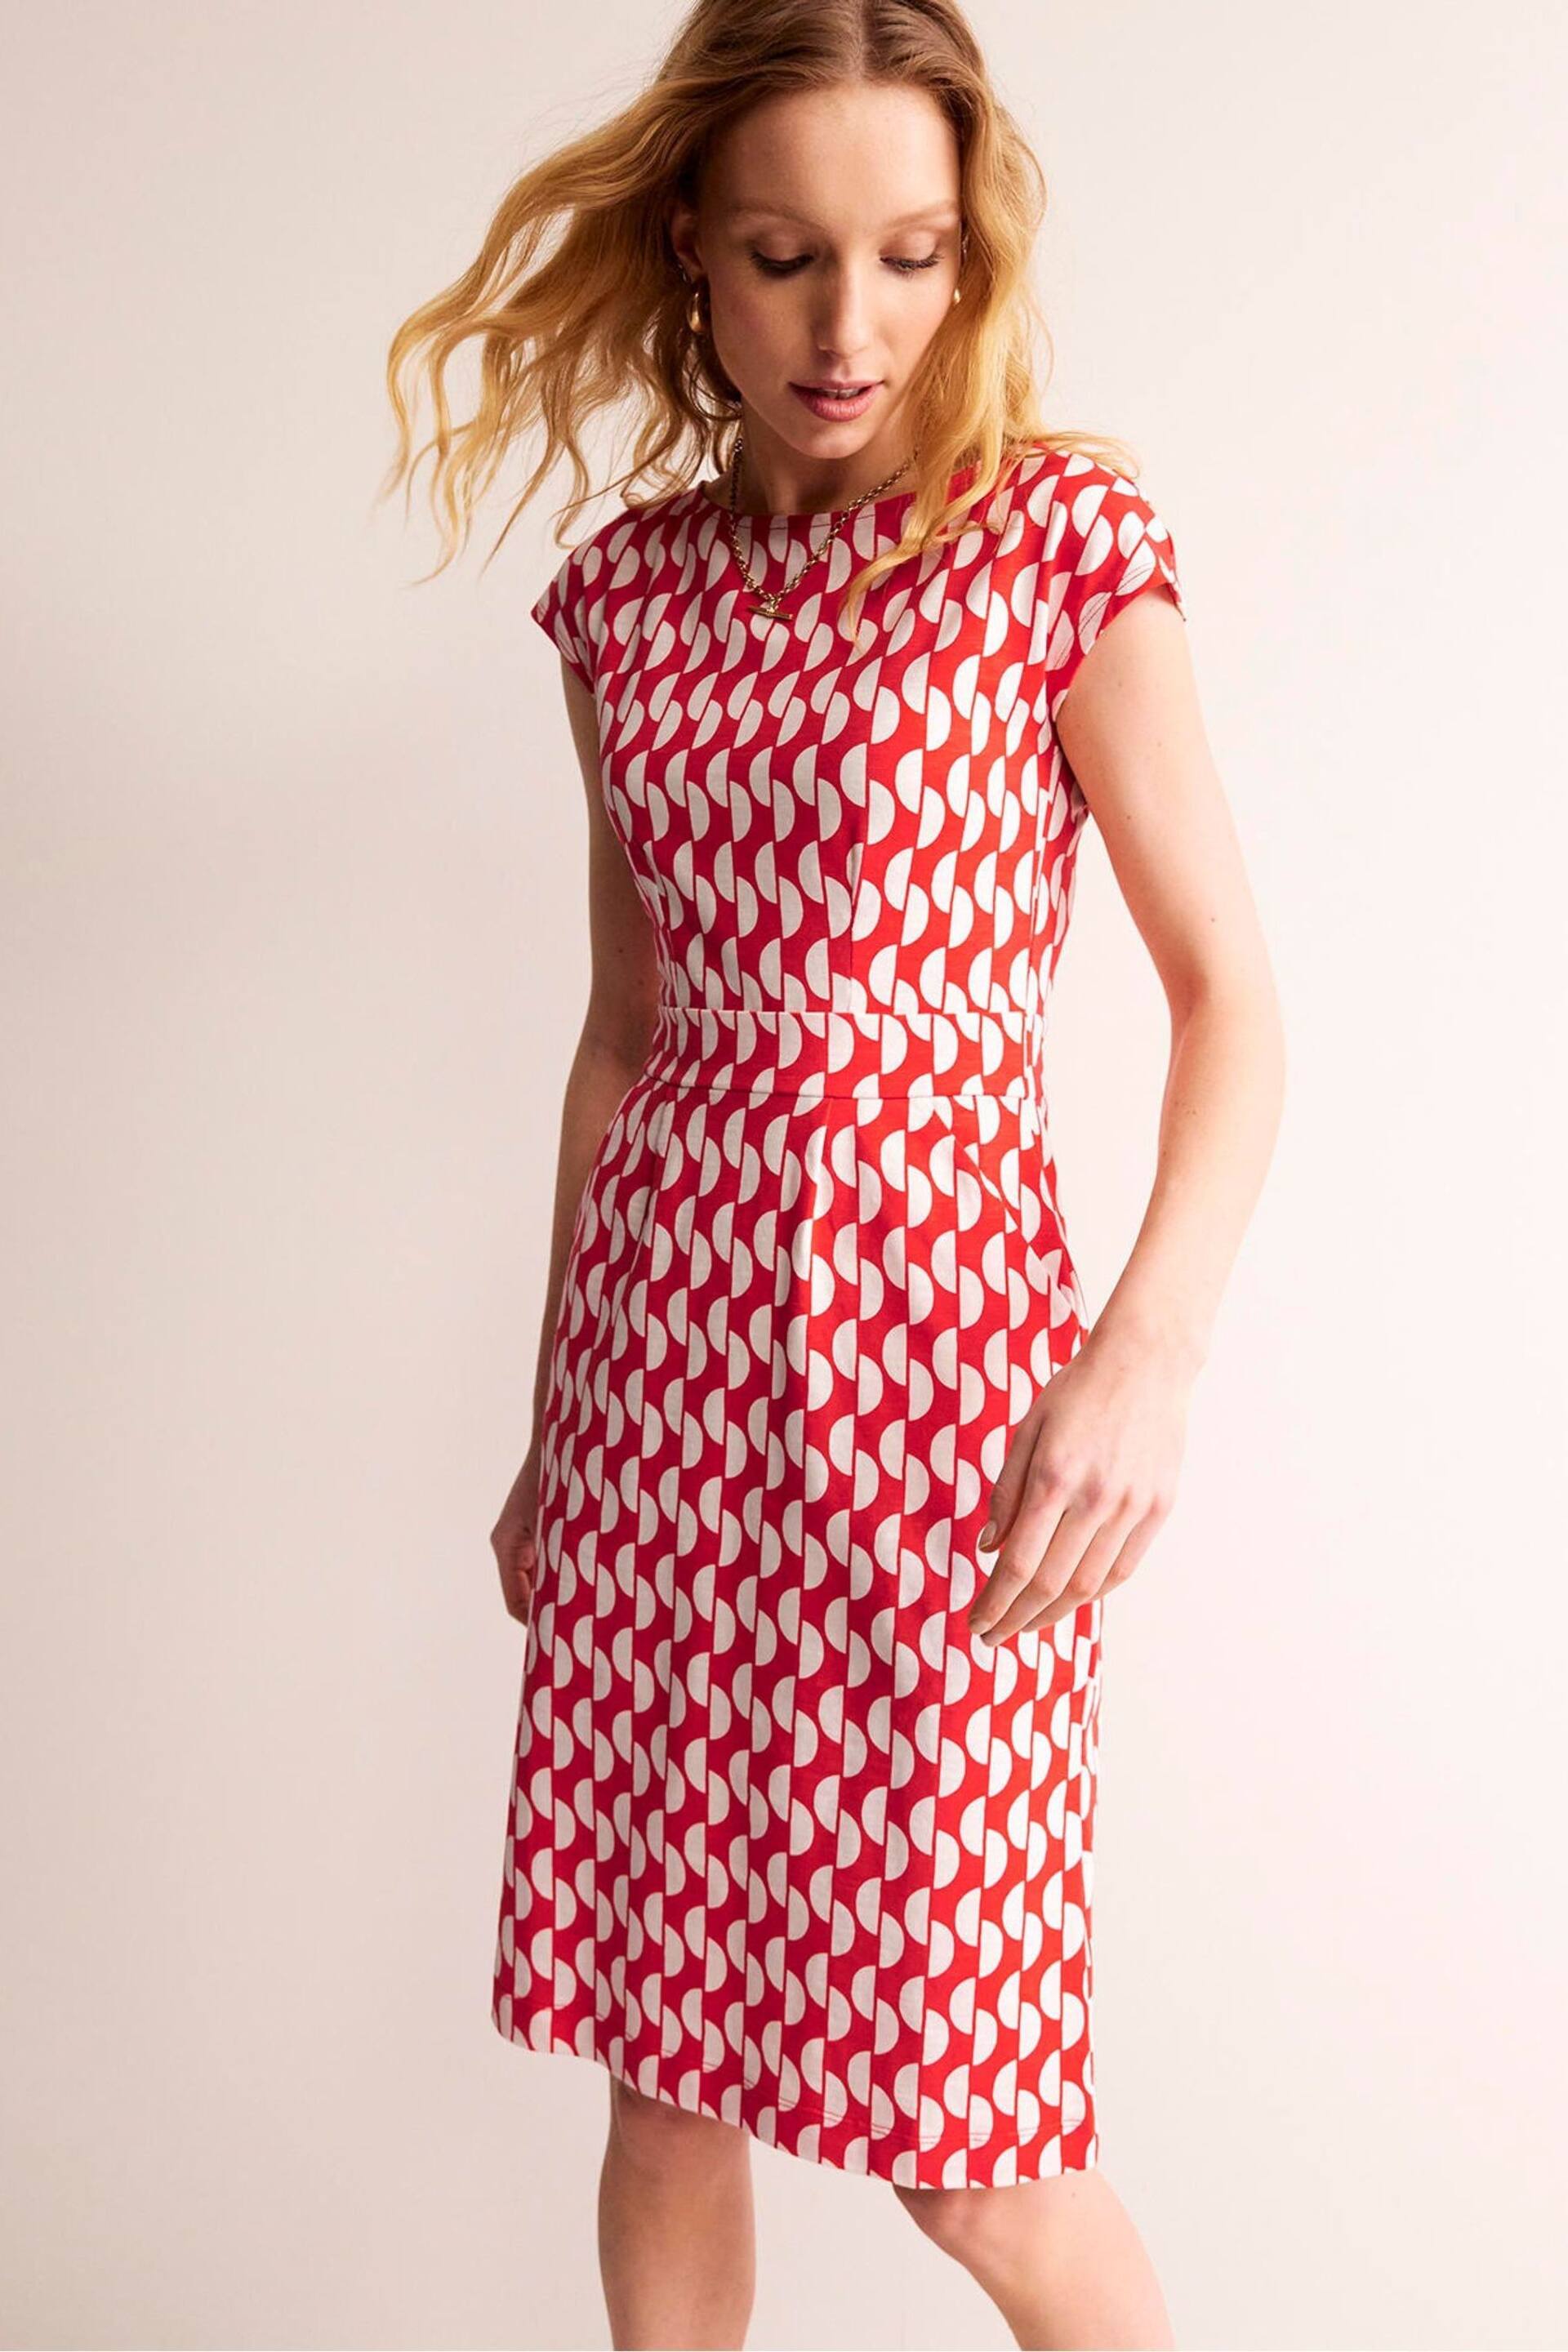 Boden Red Florrie Jersey Dress - Image 1 of 4